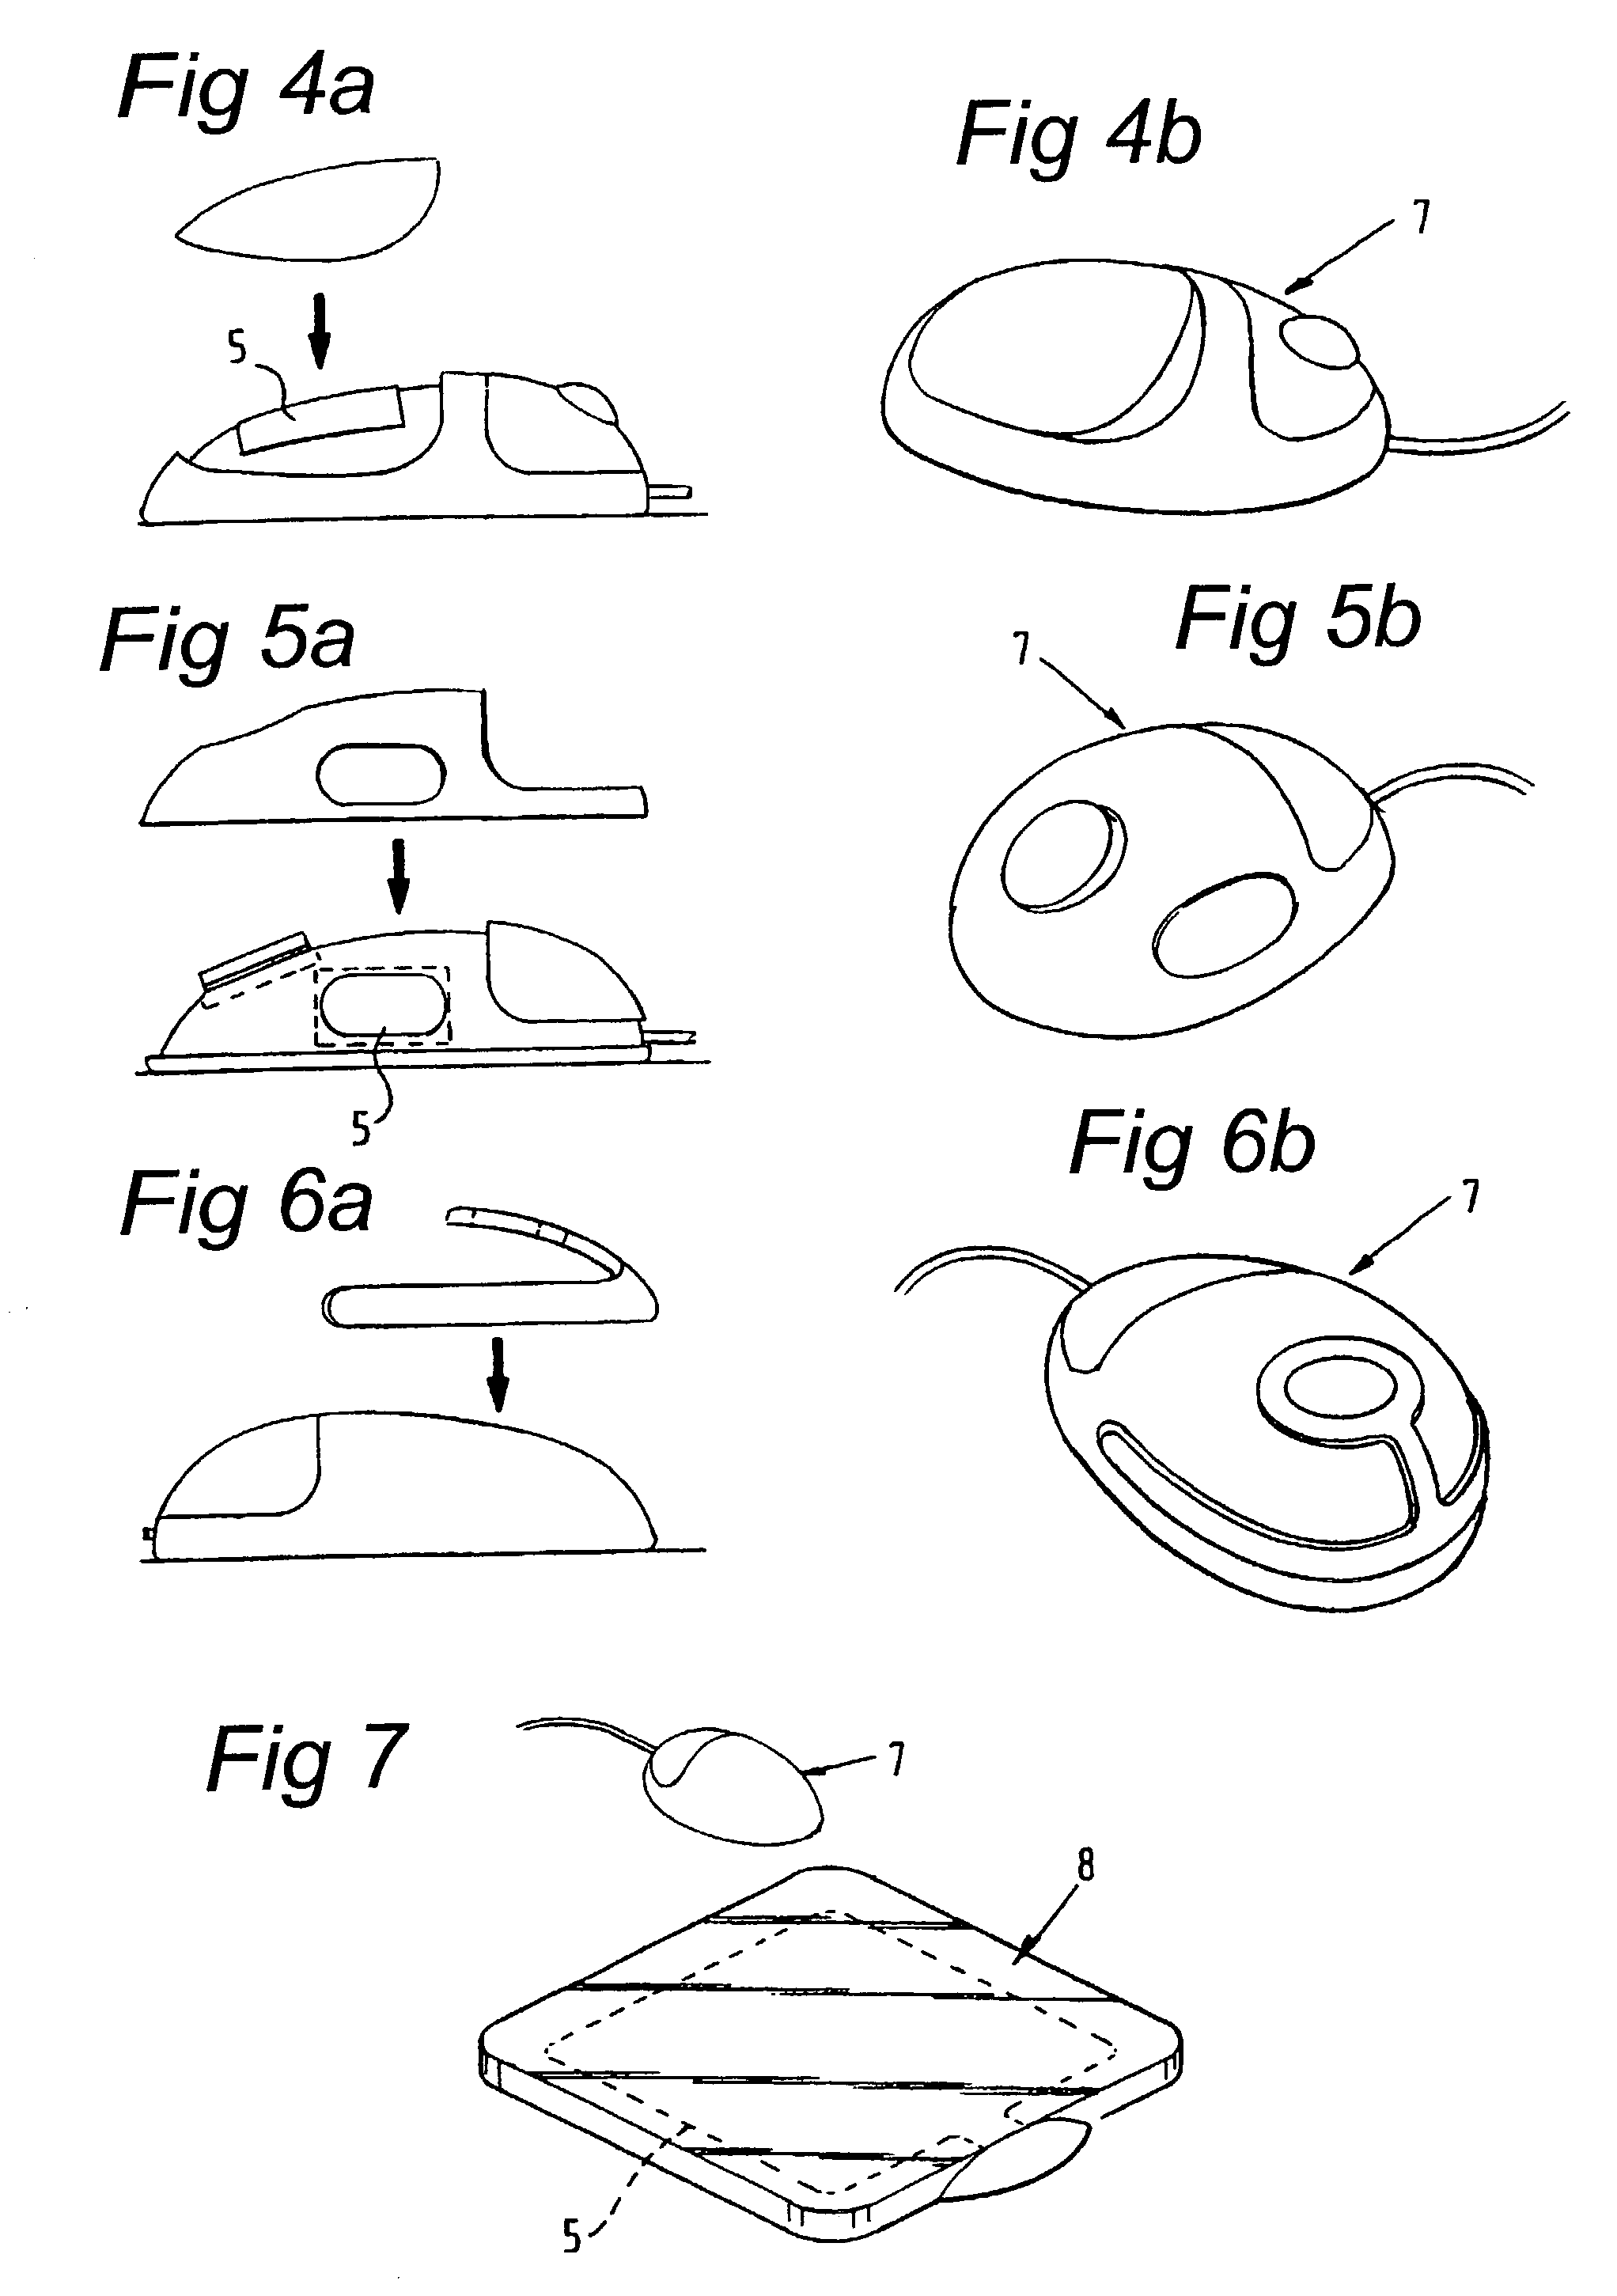 Methods for treatment and prevention of disorders resulting from hypertension of neck and shoulder muscles